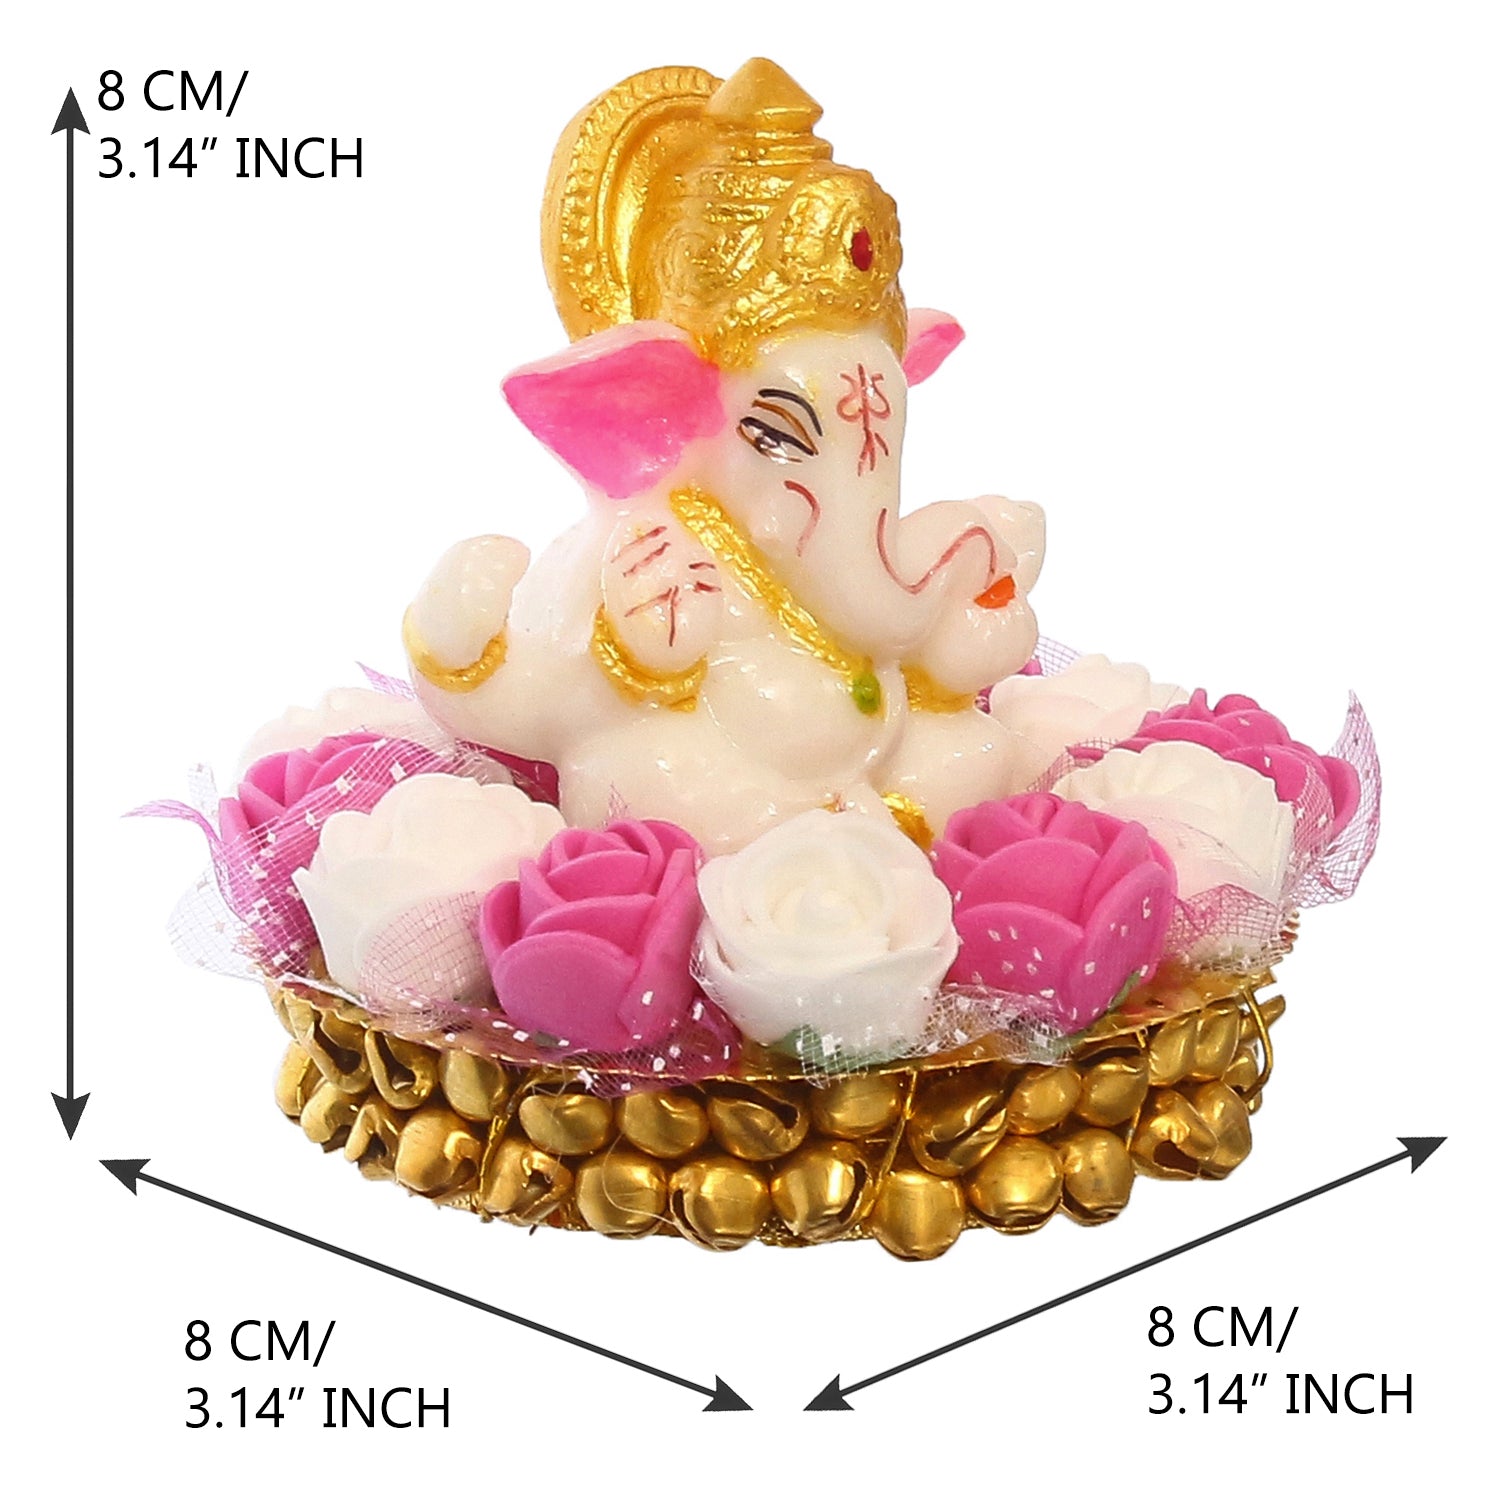 Golden and White Polyresin Lord Ganesha Idol on Decorative Handcrafted Plate with Pink and White Flowers 3